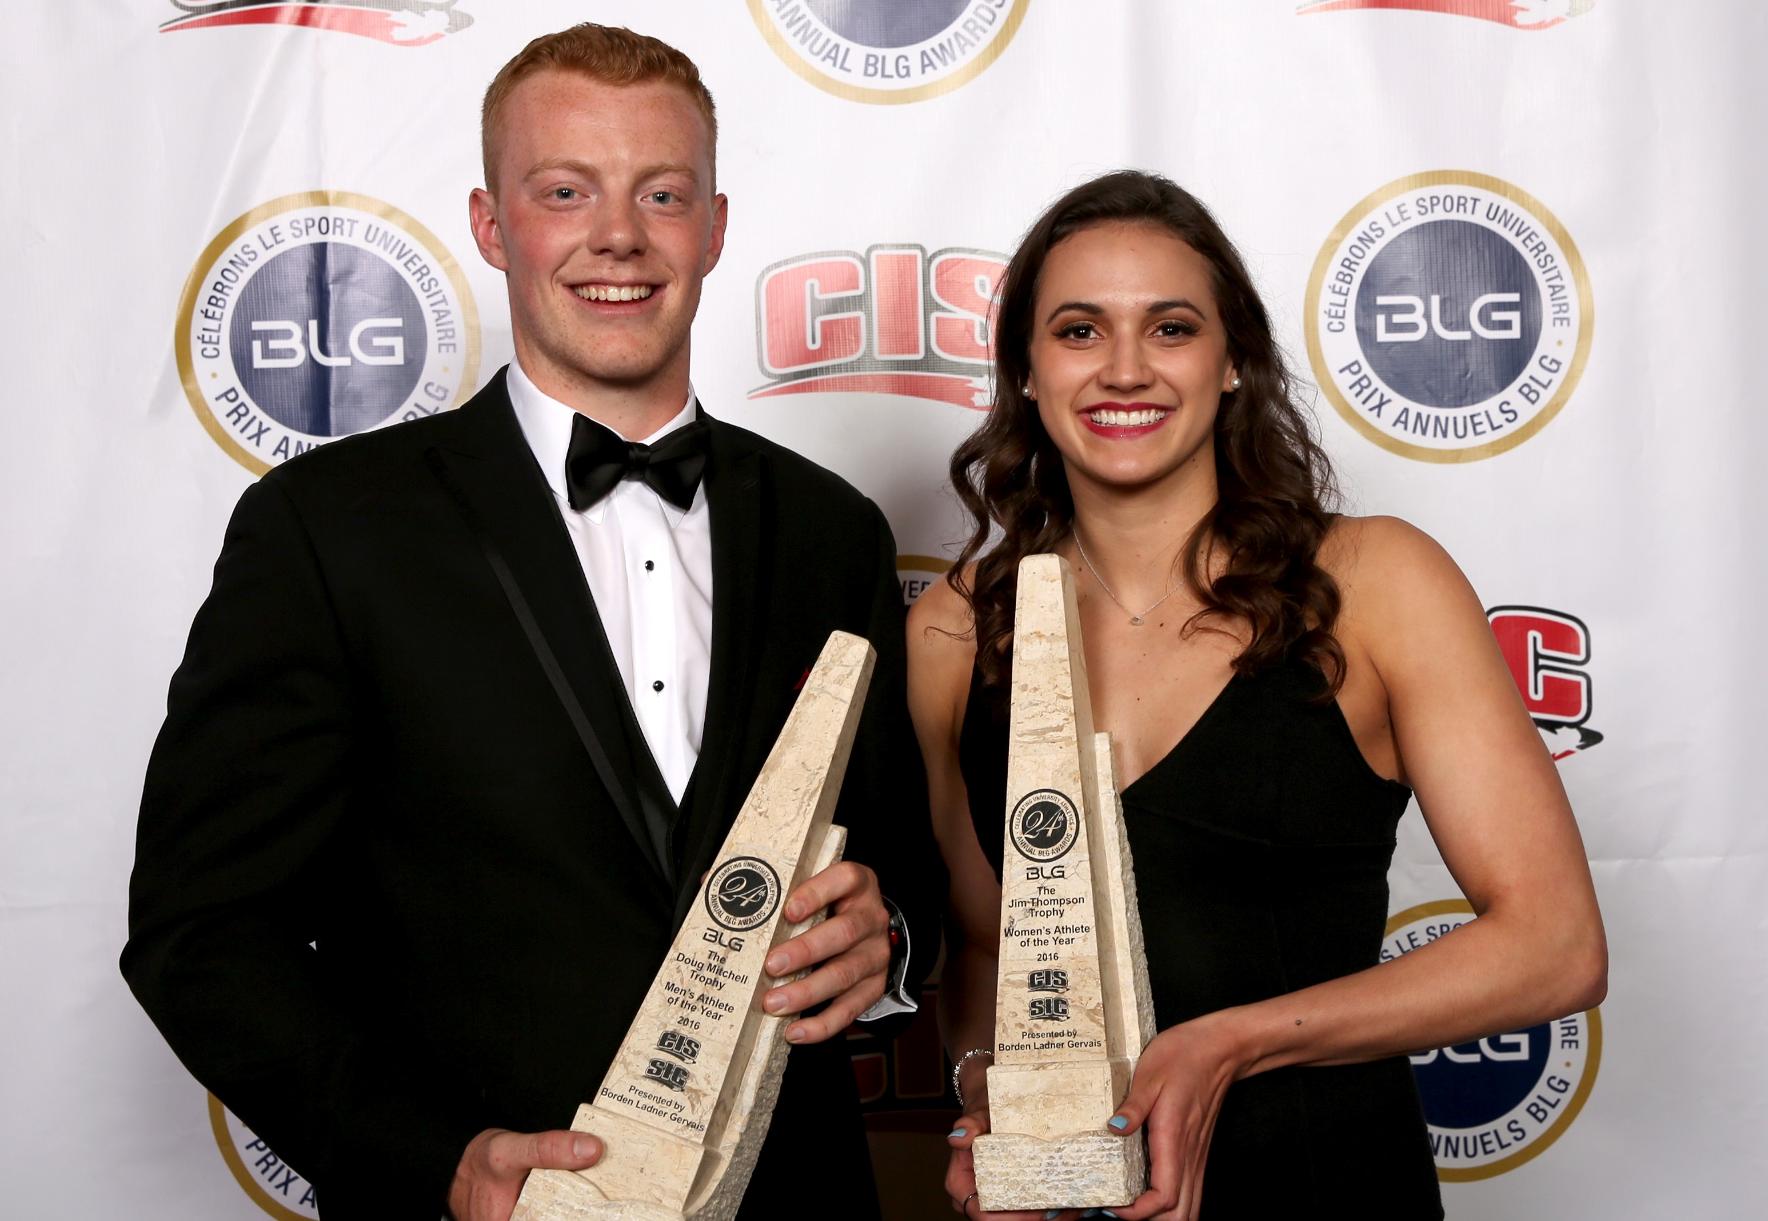 24th Annual BLG Awards: Toronto’s Masse, Calgary’s Buckley named CIS athletes of the year